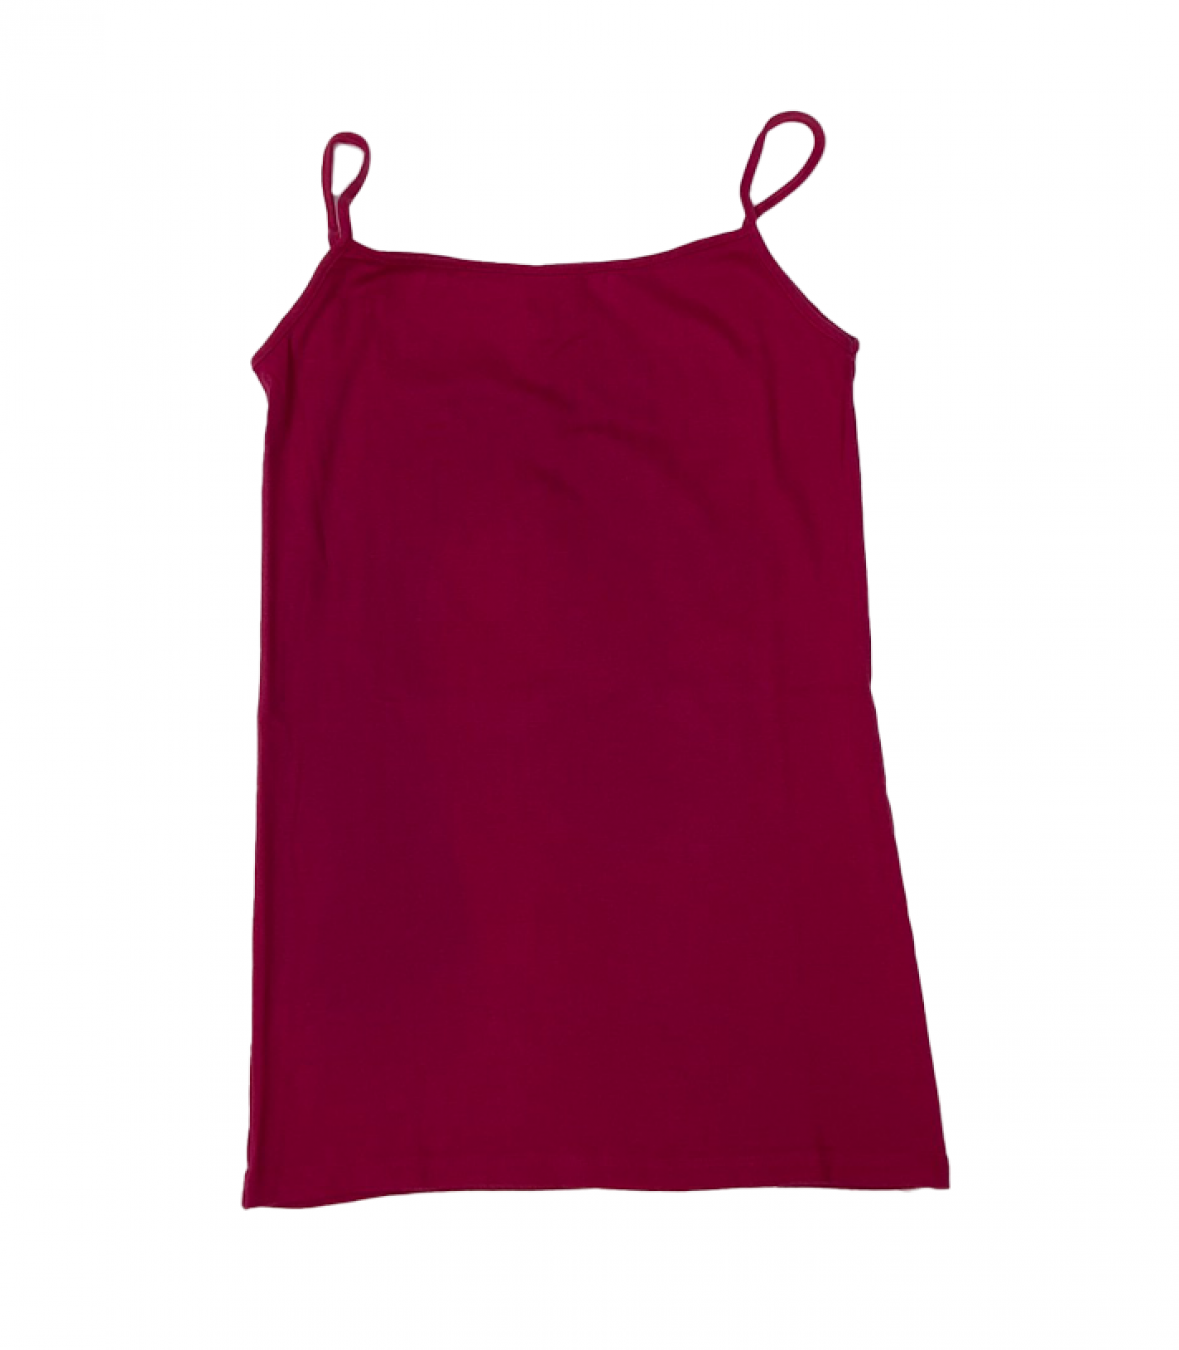 Cotton Camisole Made in USA | RAMBLERS WAY